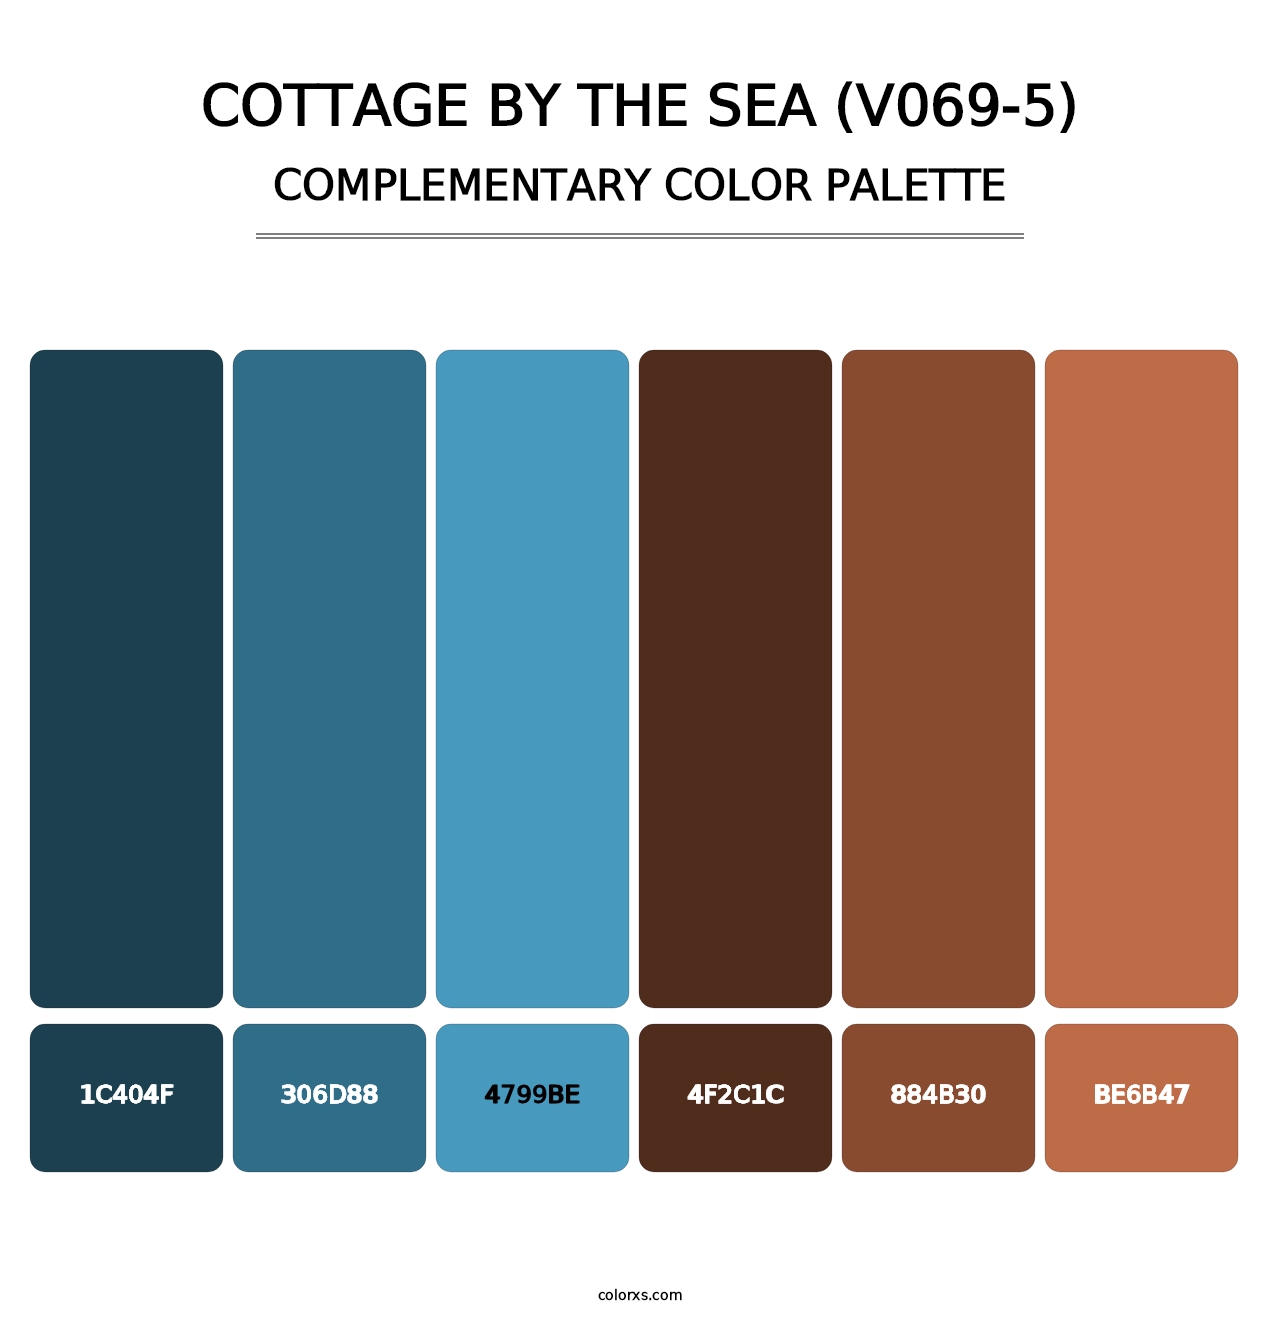 Cottage by the Sea (V069-5) - Complementary Color Palette